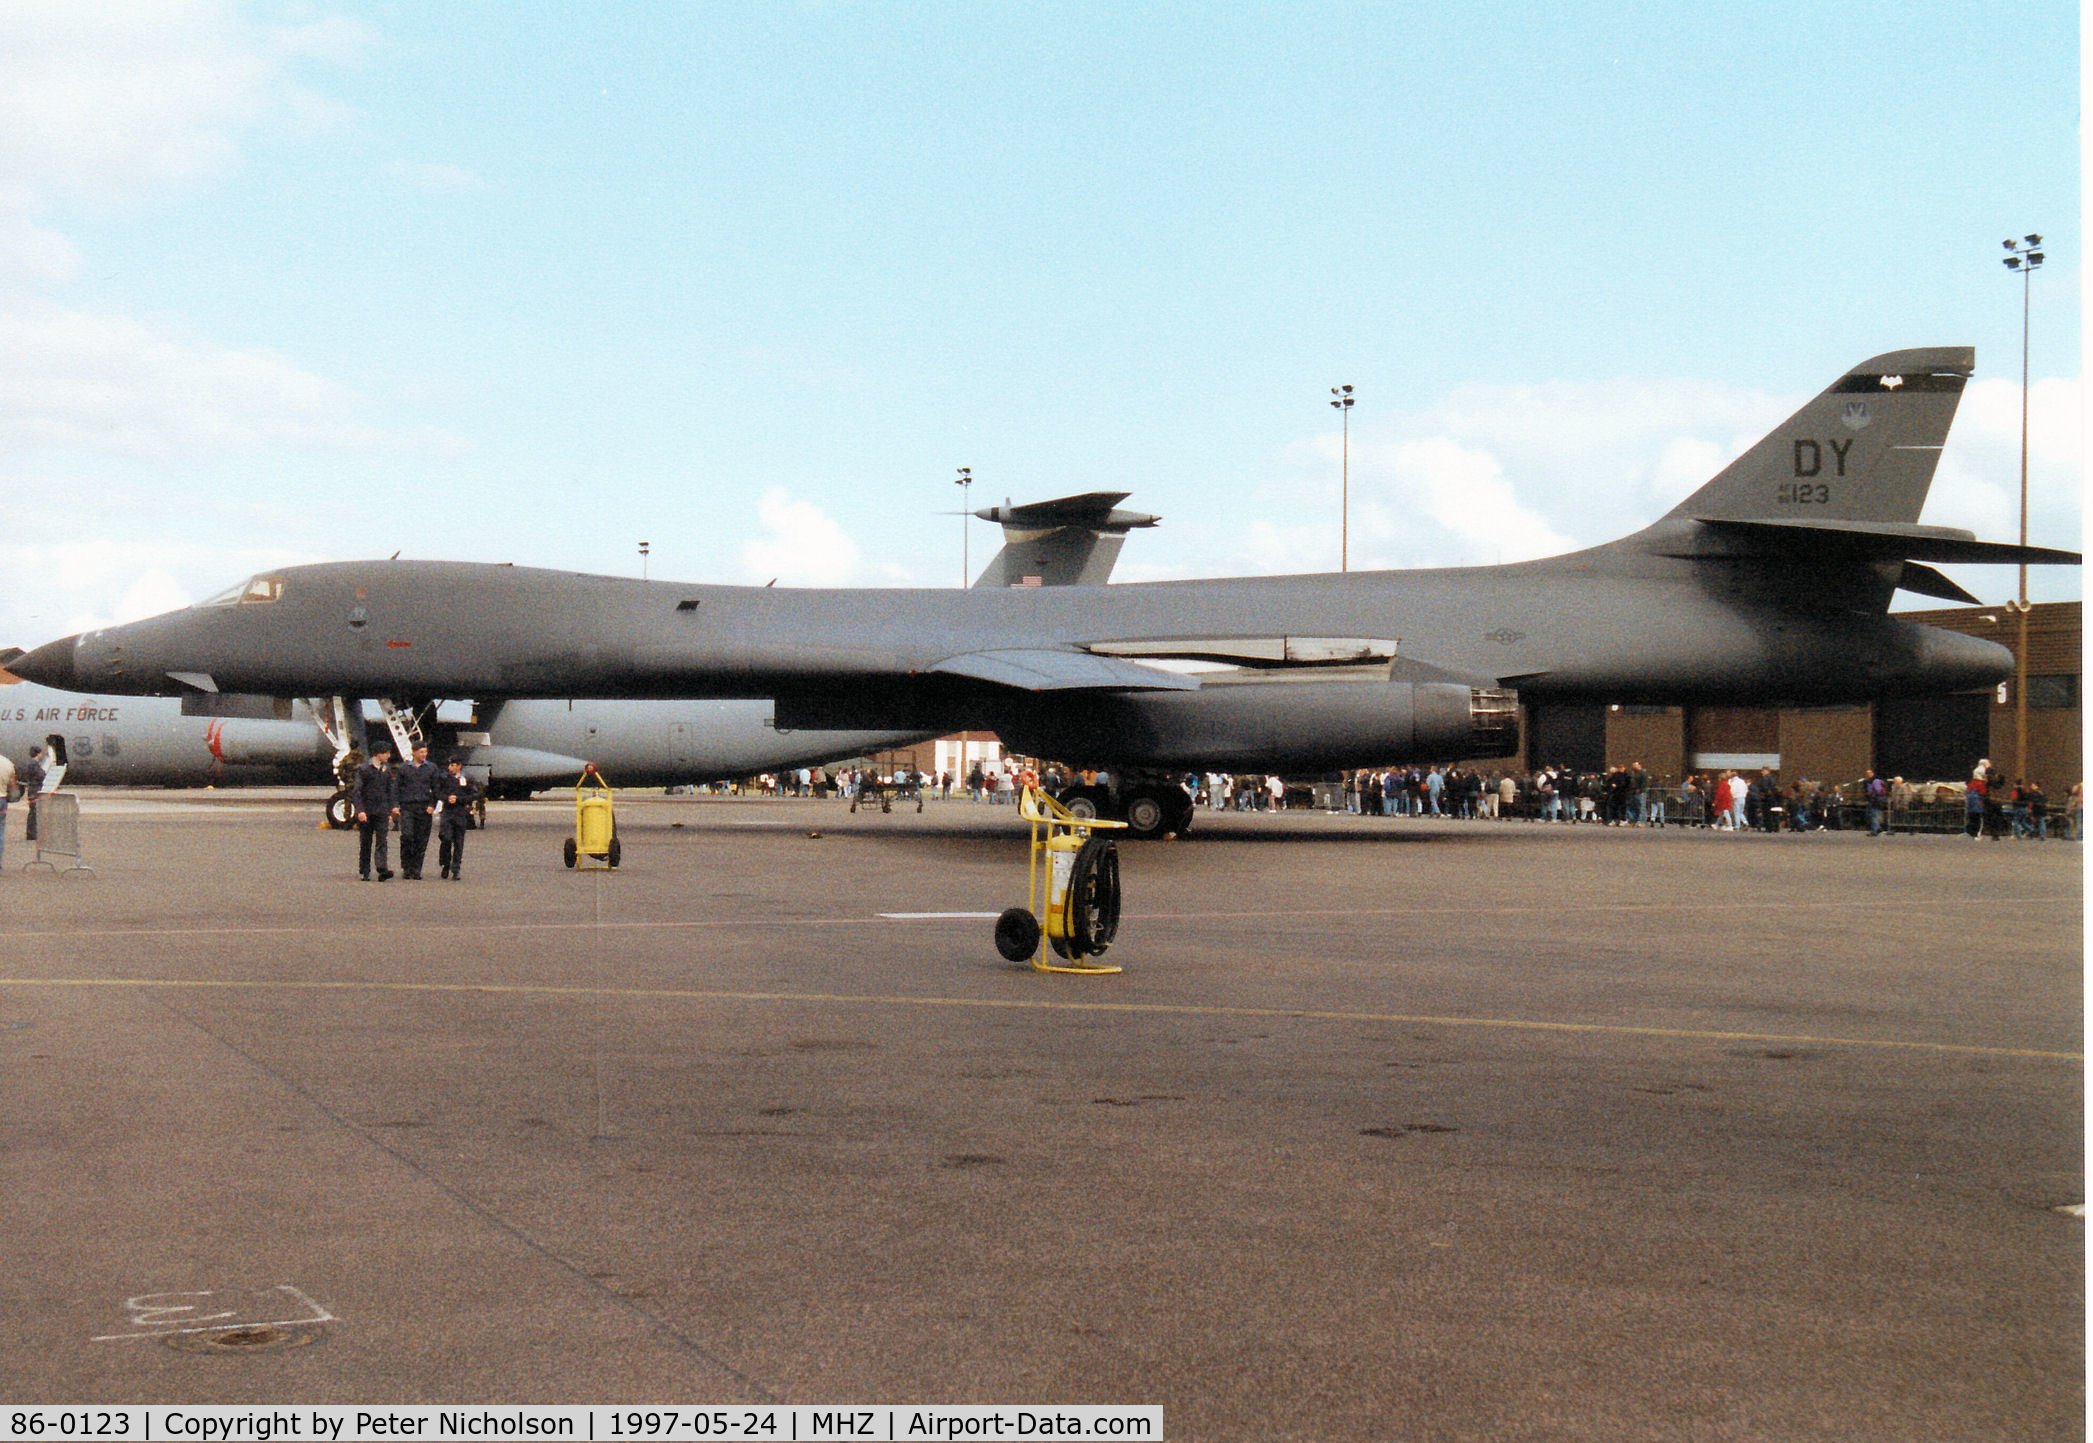 86-0123, 1986 Rockwell B-1B Lancer C/N 83, B-1B Lancer, callsign Dark 41, of the 9th Bomb Squadron/7th Bomb Wing at Dyess AFB on display at the 1997 RAF Mildenhall Air Fete.